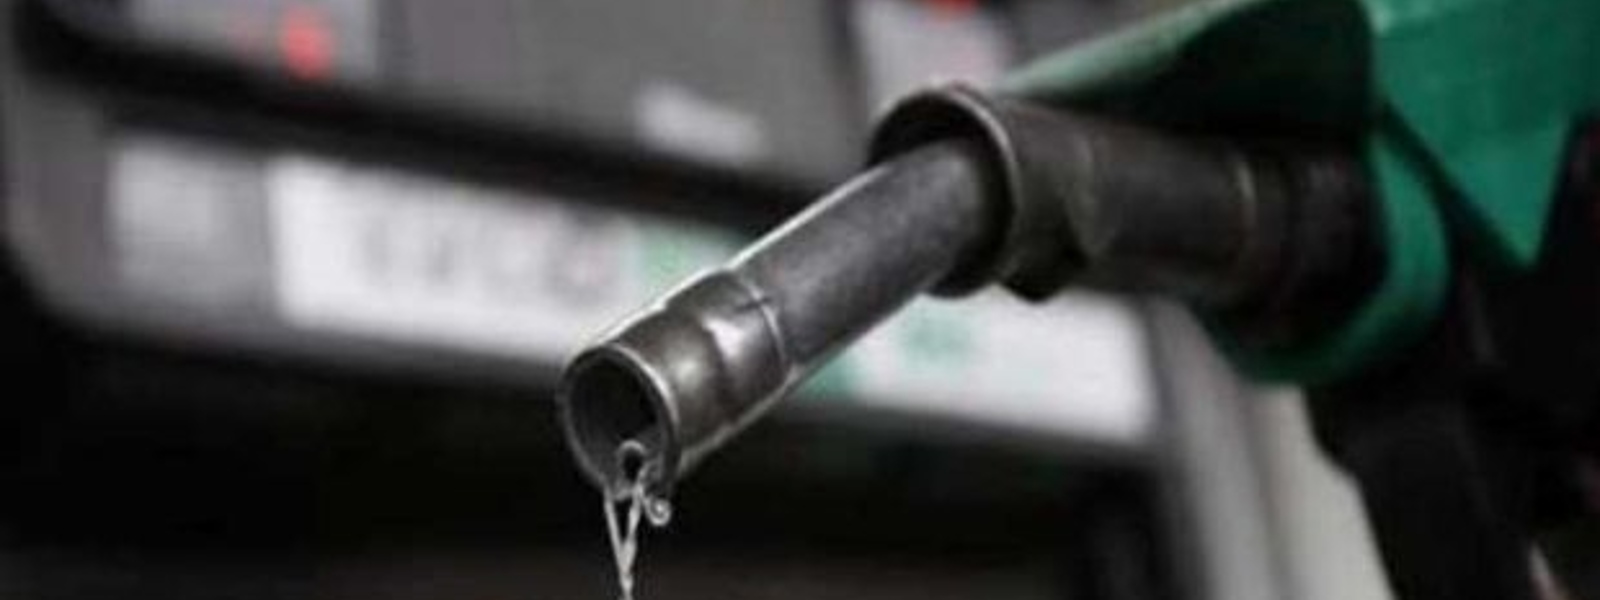 STF arrests one person for illegal stockpiling of fuel